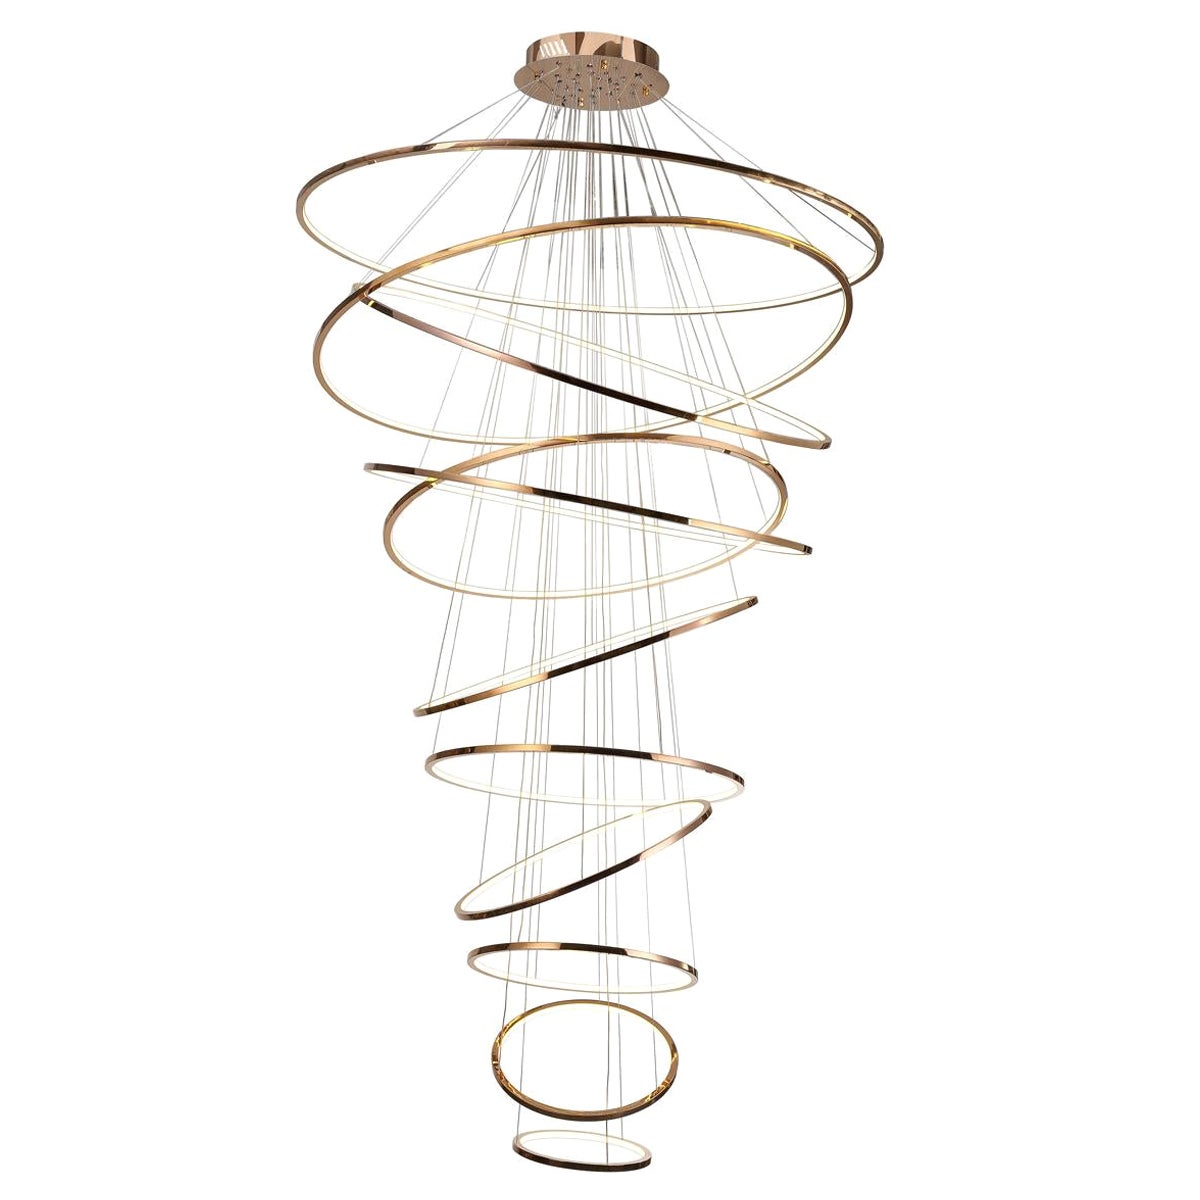 LED Swirl 11 Ring Swirl Chandelier Pendant Light Shown in Polished Gold finish For Sale